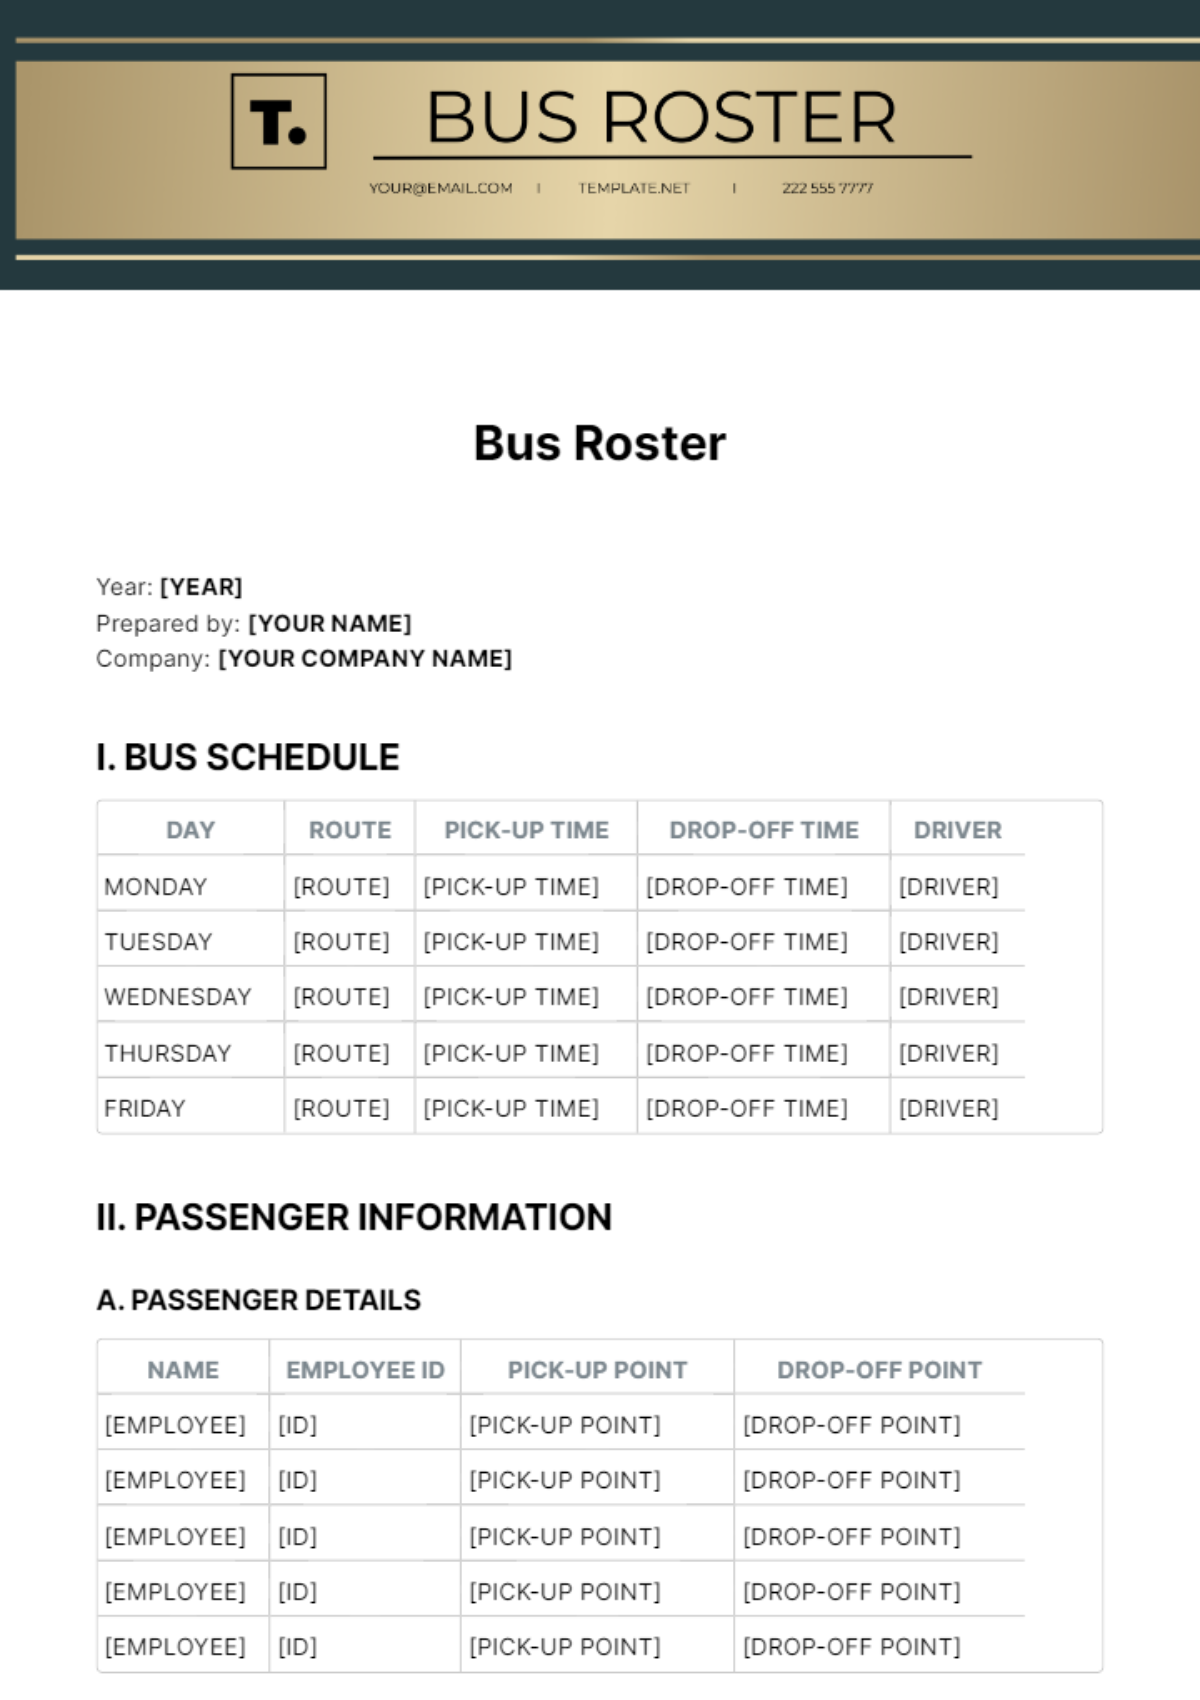 Bus Roster Template